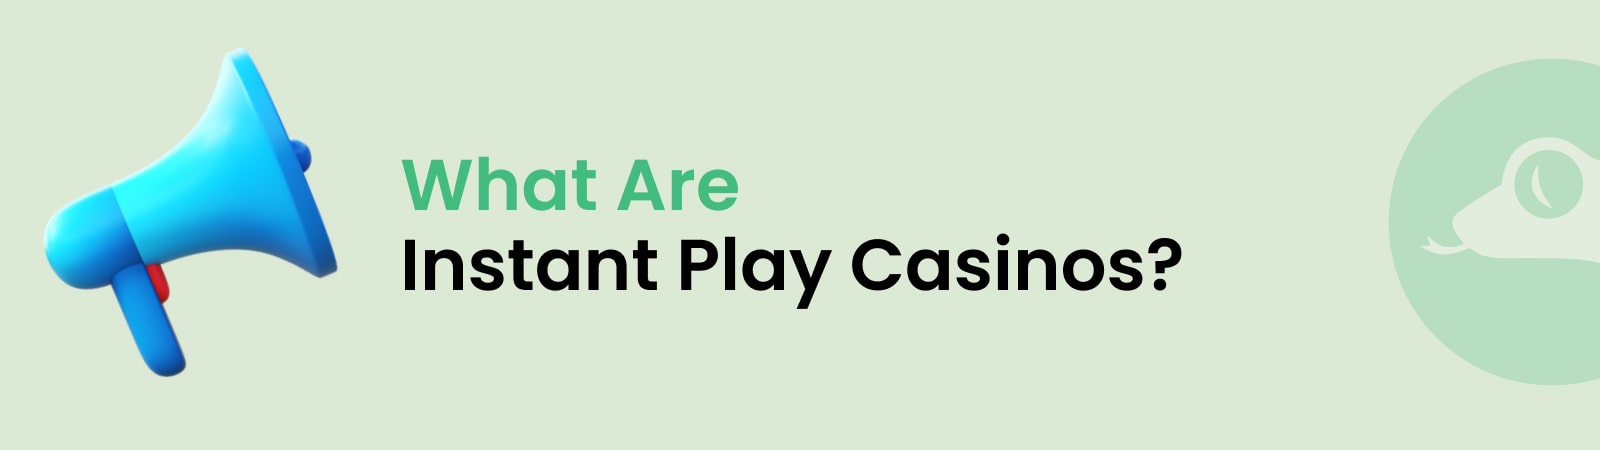 what are instant play casinos